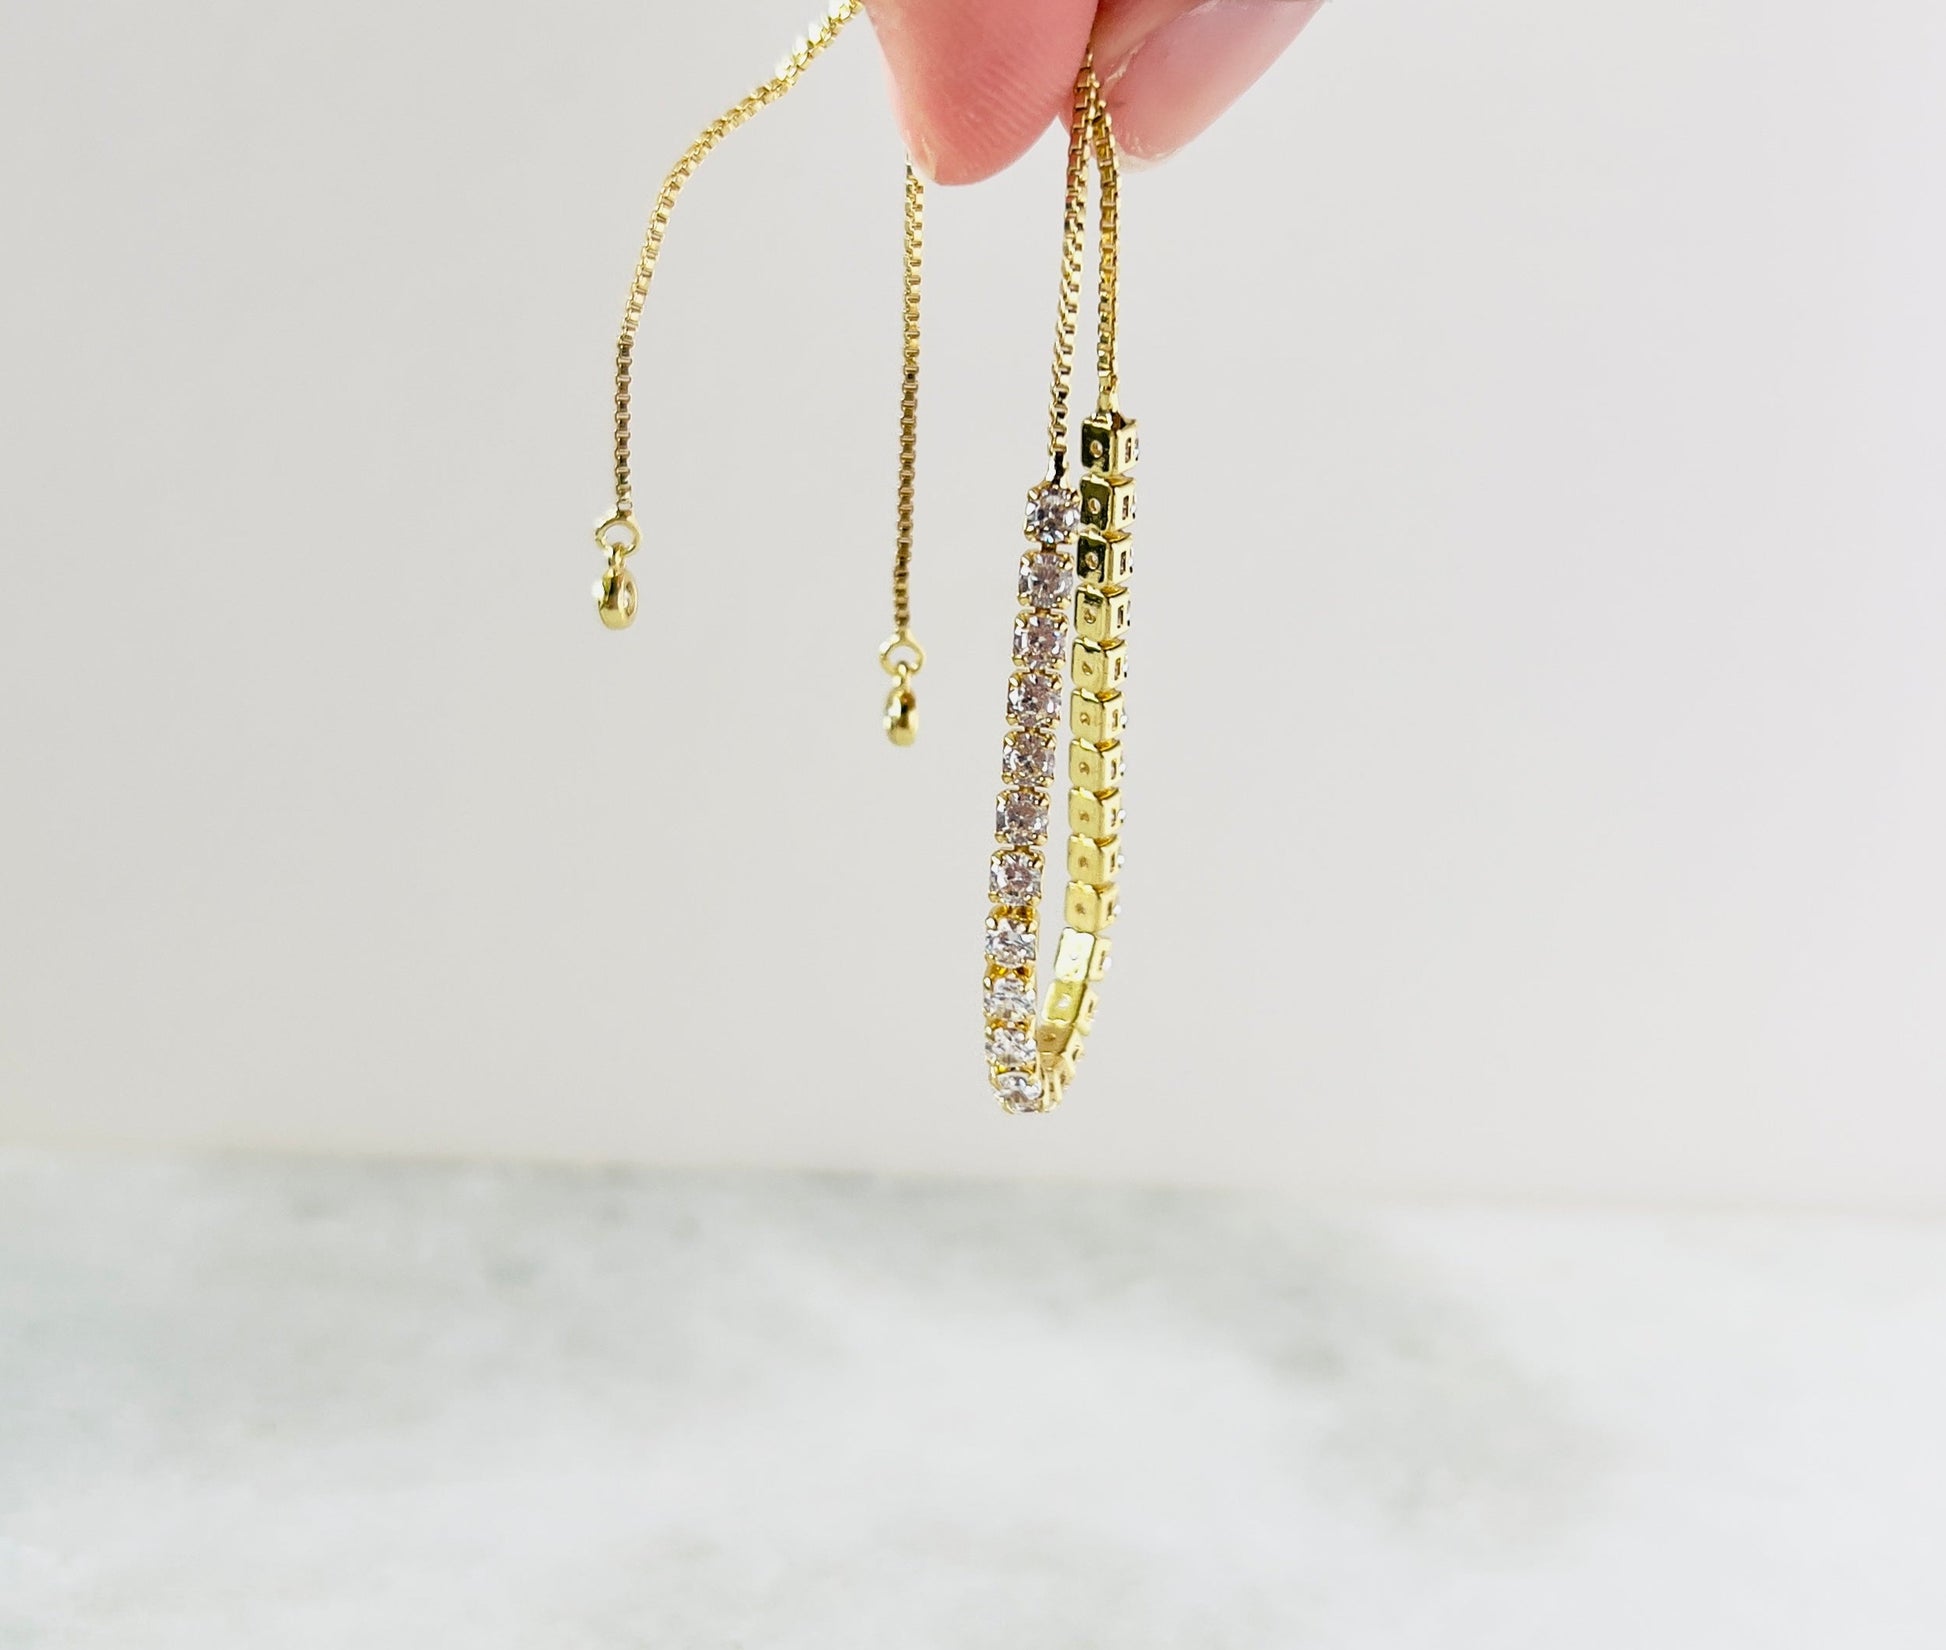 The drawstring is accented with large cubic zirconia stones, enhancing the overall elegance and creating a captivating shimmer with every movement.